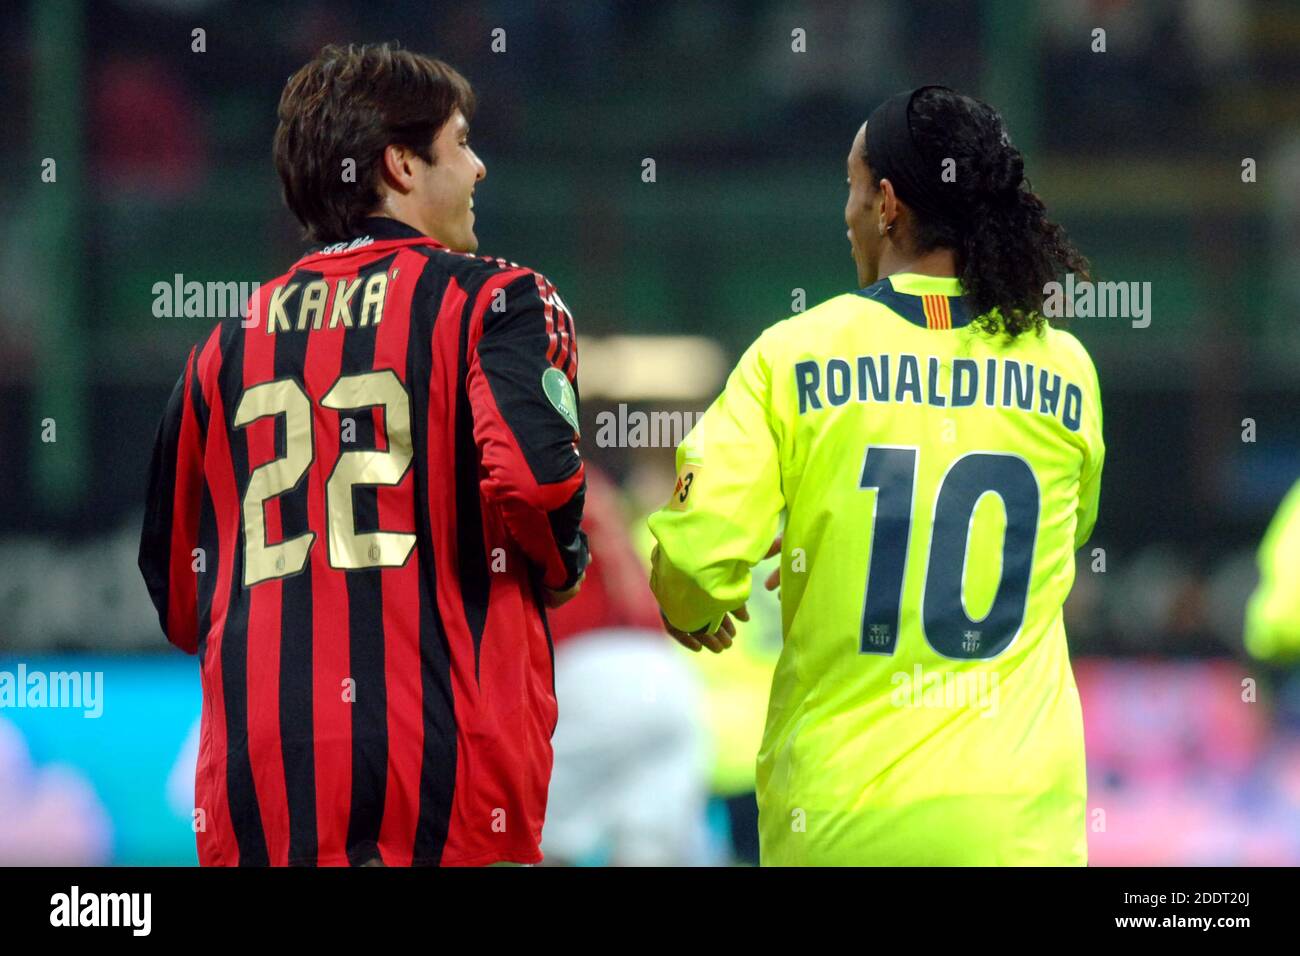 Brazilians football players Ronaldinho of FC Barcelona, and Kakà of AC Milan, during a UEFA Champions League's match, in Milan, 2007. Stock Photo